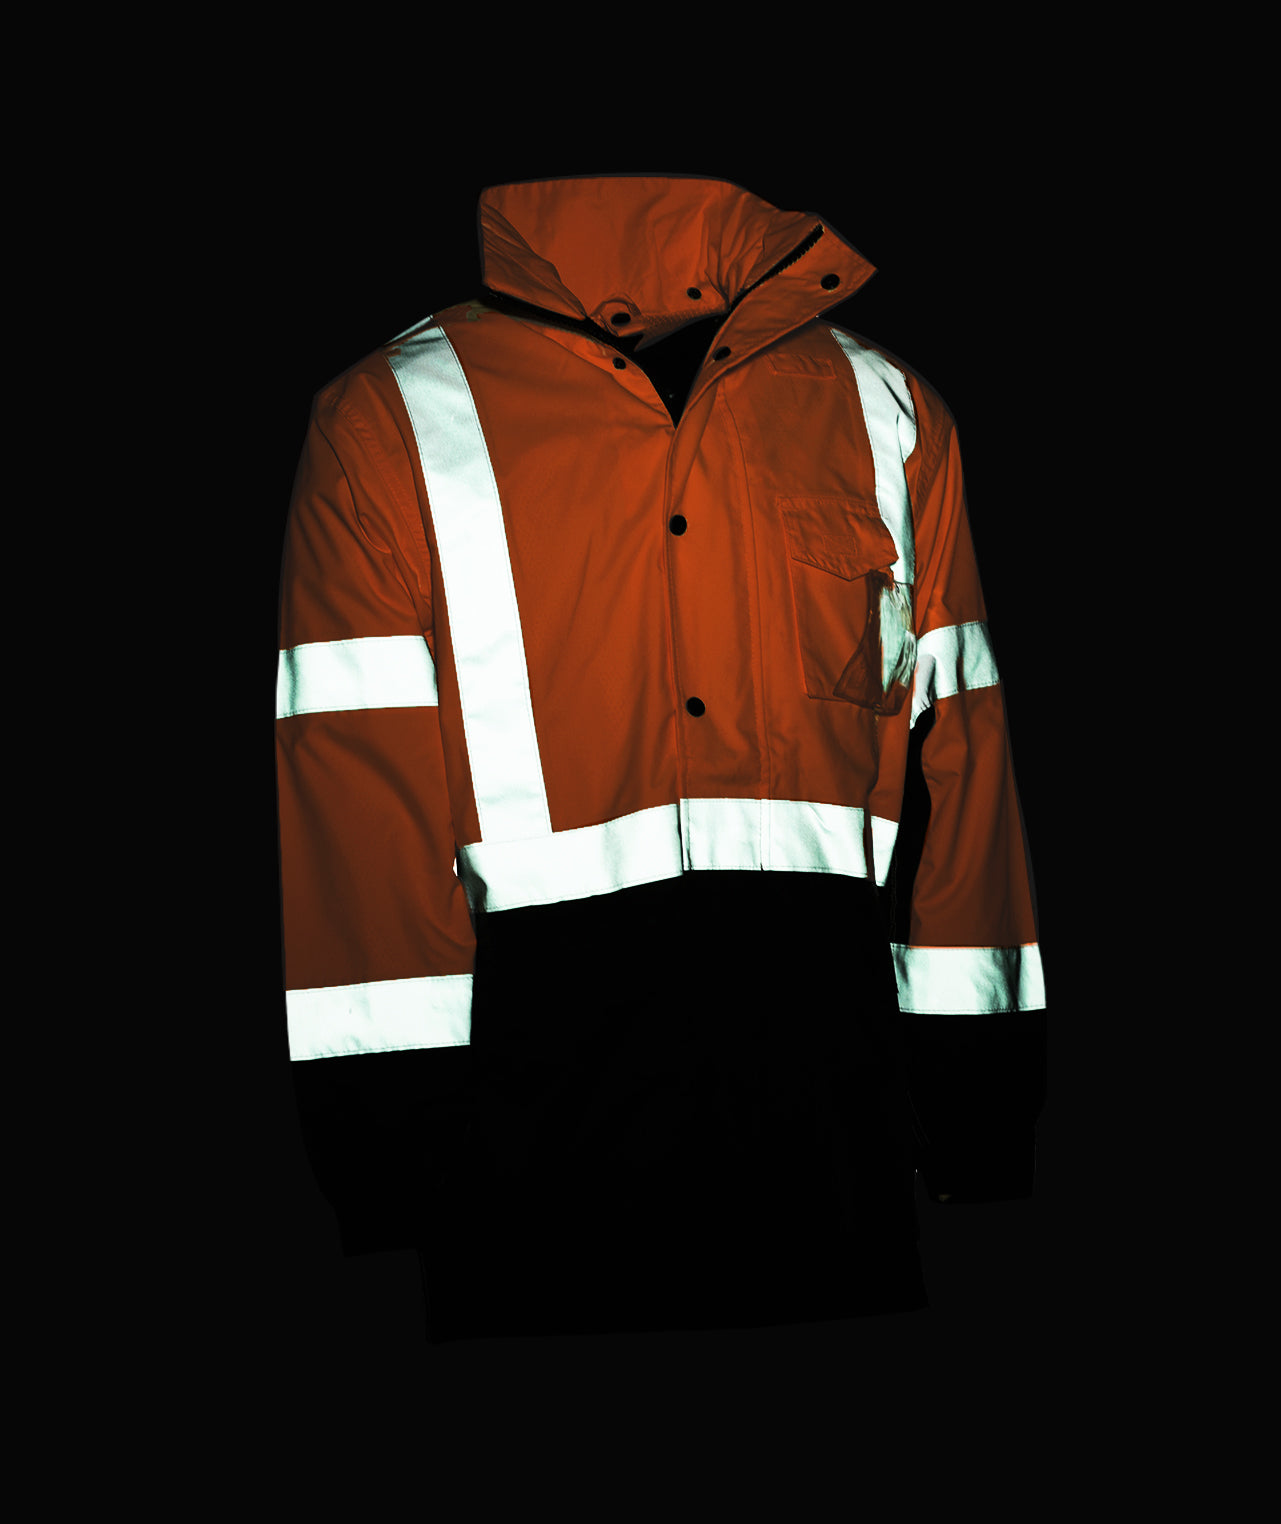 sesafety Reflective Jacket for Men, High Visibility Jackets for Men, Safety  Jackets for Men, Hi Vis Construction Bomber Jackets Waterproof with